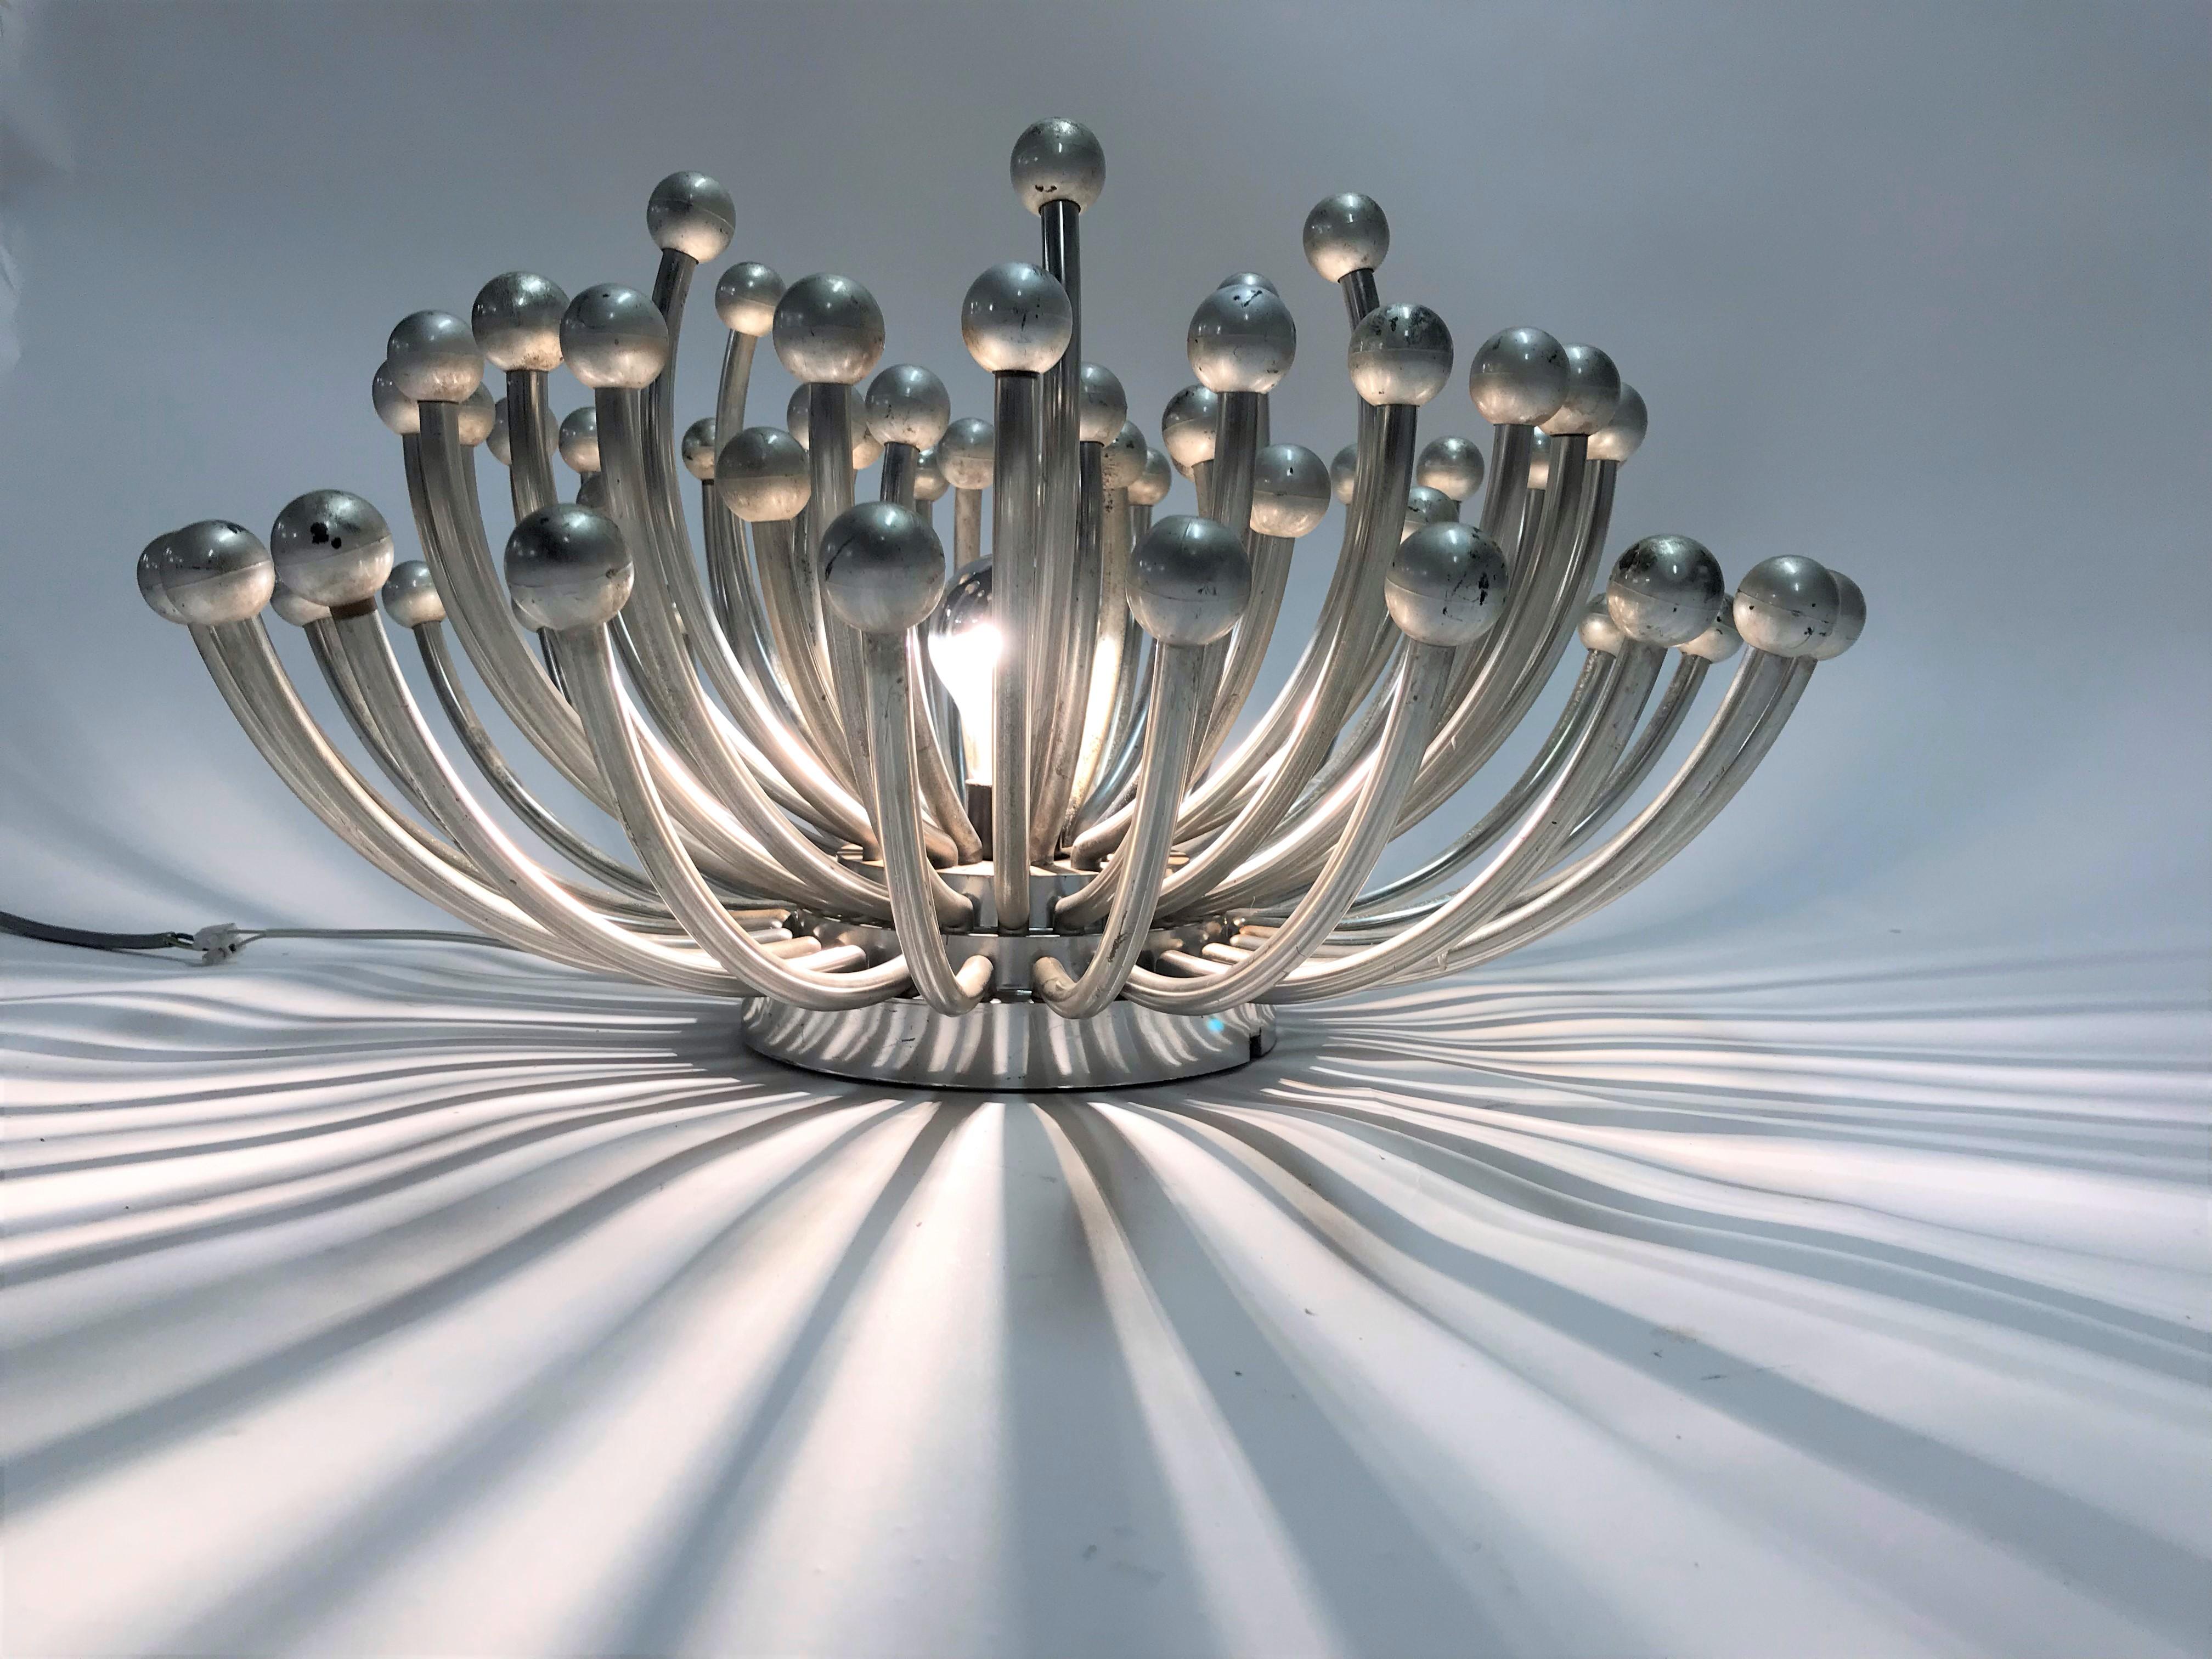 Stunning Pistillo sputnik lamp designed by Studio Tetrach.

This lamp can be used as a table lamp or even as a wall or ceiling light.

It emits a spectacular light.

Good condition, slight patina.

1969, Italy.

Measures: Diameter 60cm /